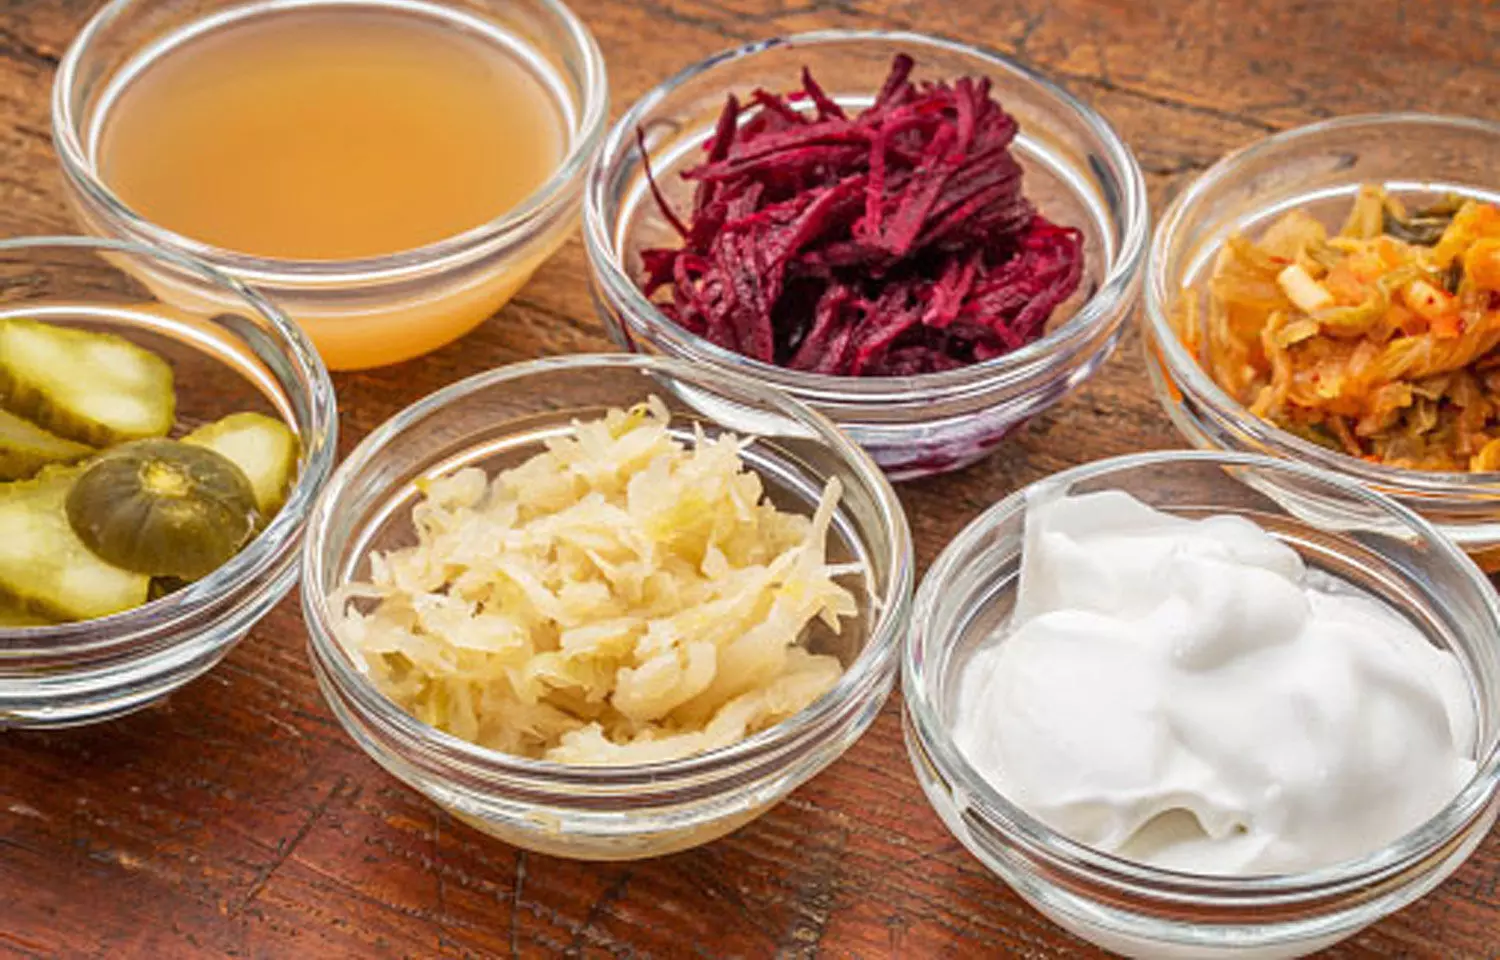 Fermented foods can keep weight in check and prevent diabetes, CVD, and cancer: Study